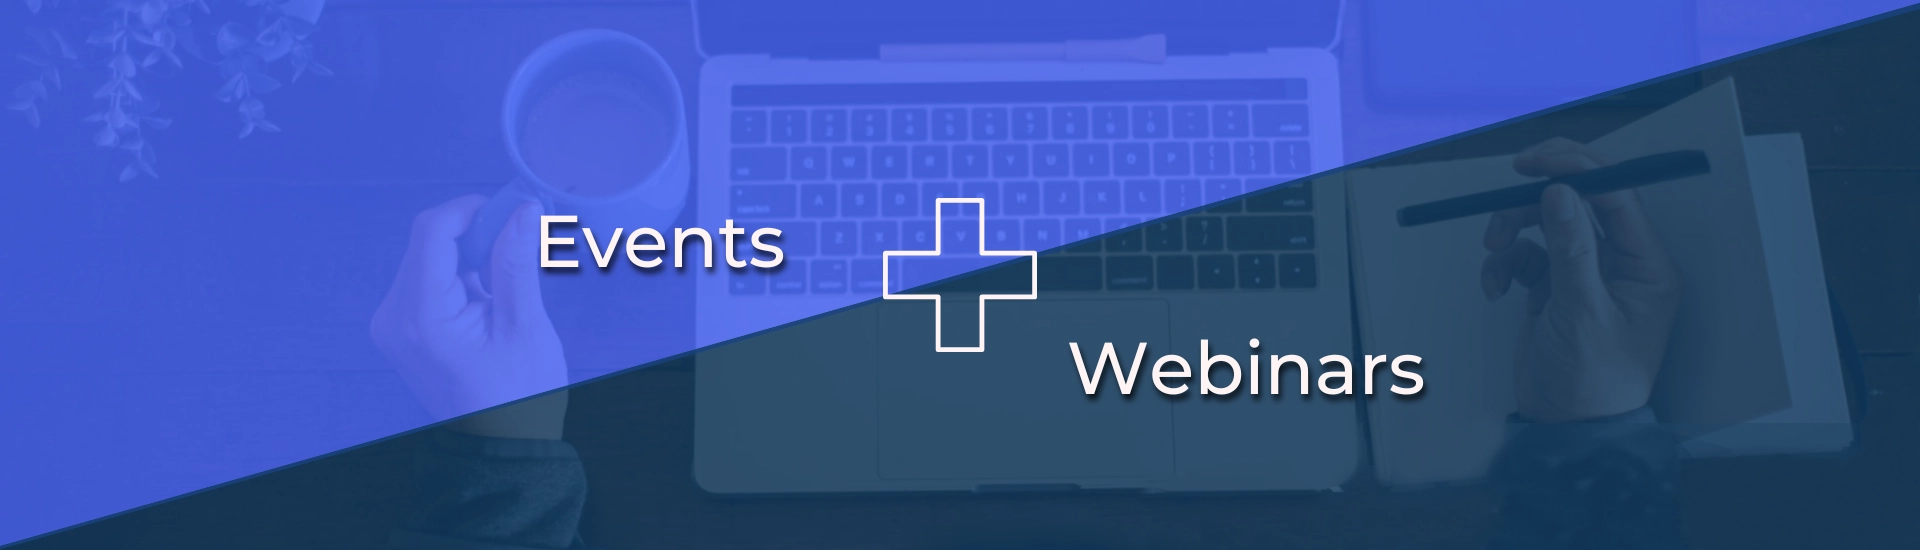 Events and webinars